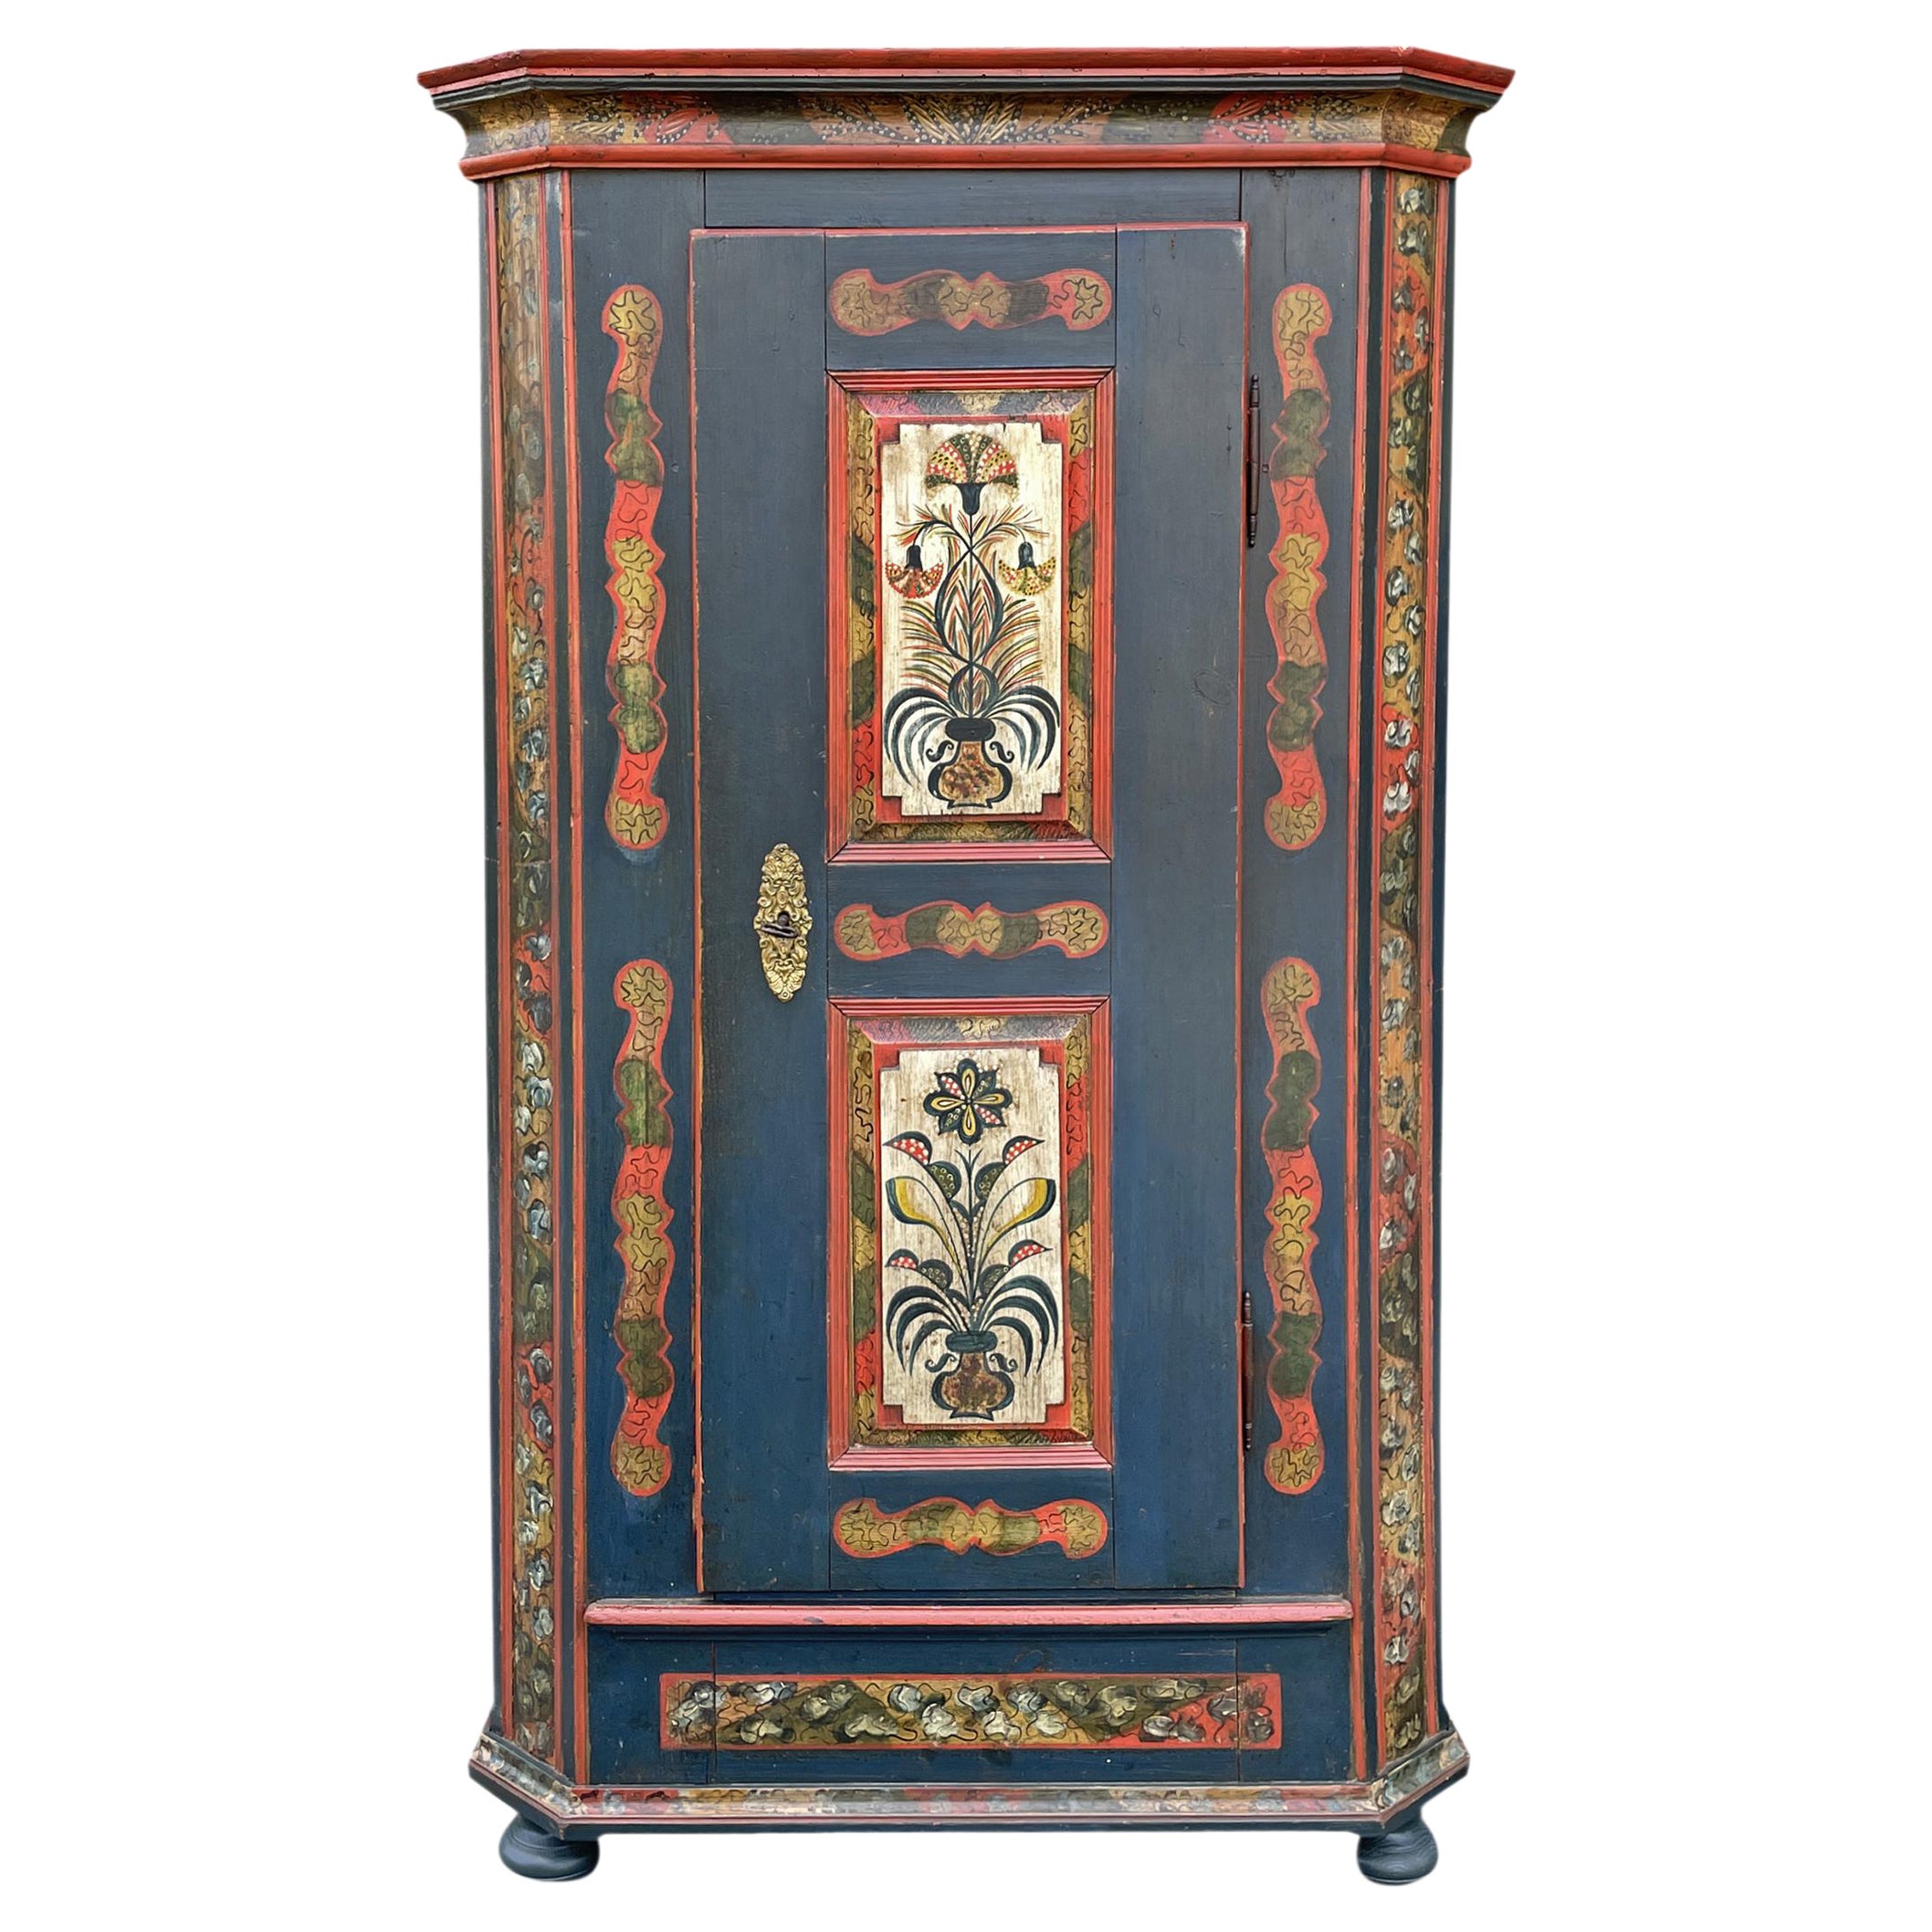 1810 Blu Floral Painted Cabinet - Central Europe